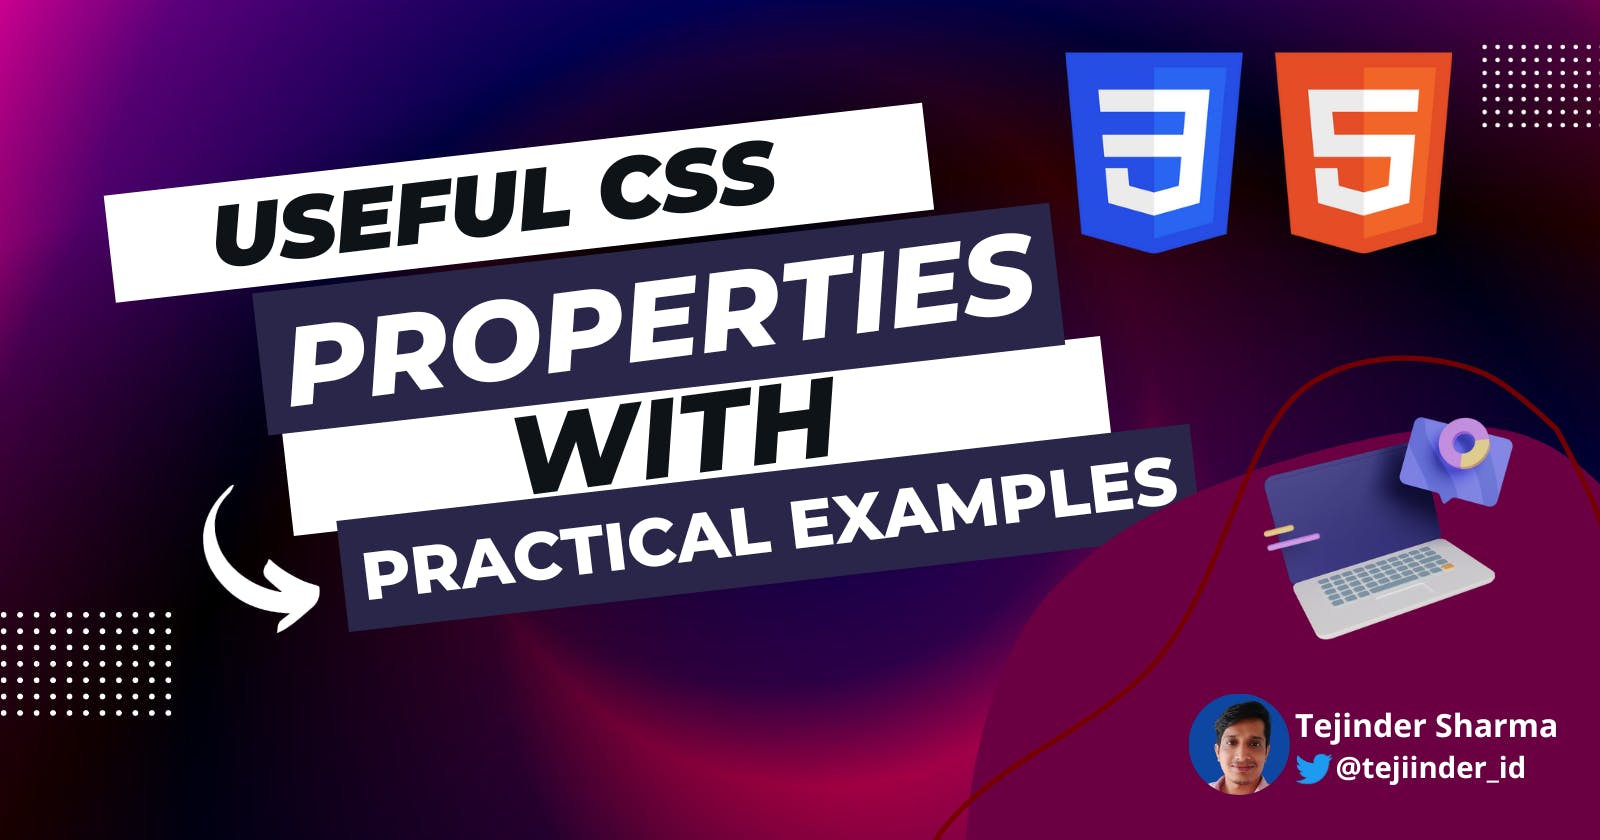 Important CSS properties that are very handy.